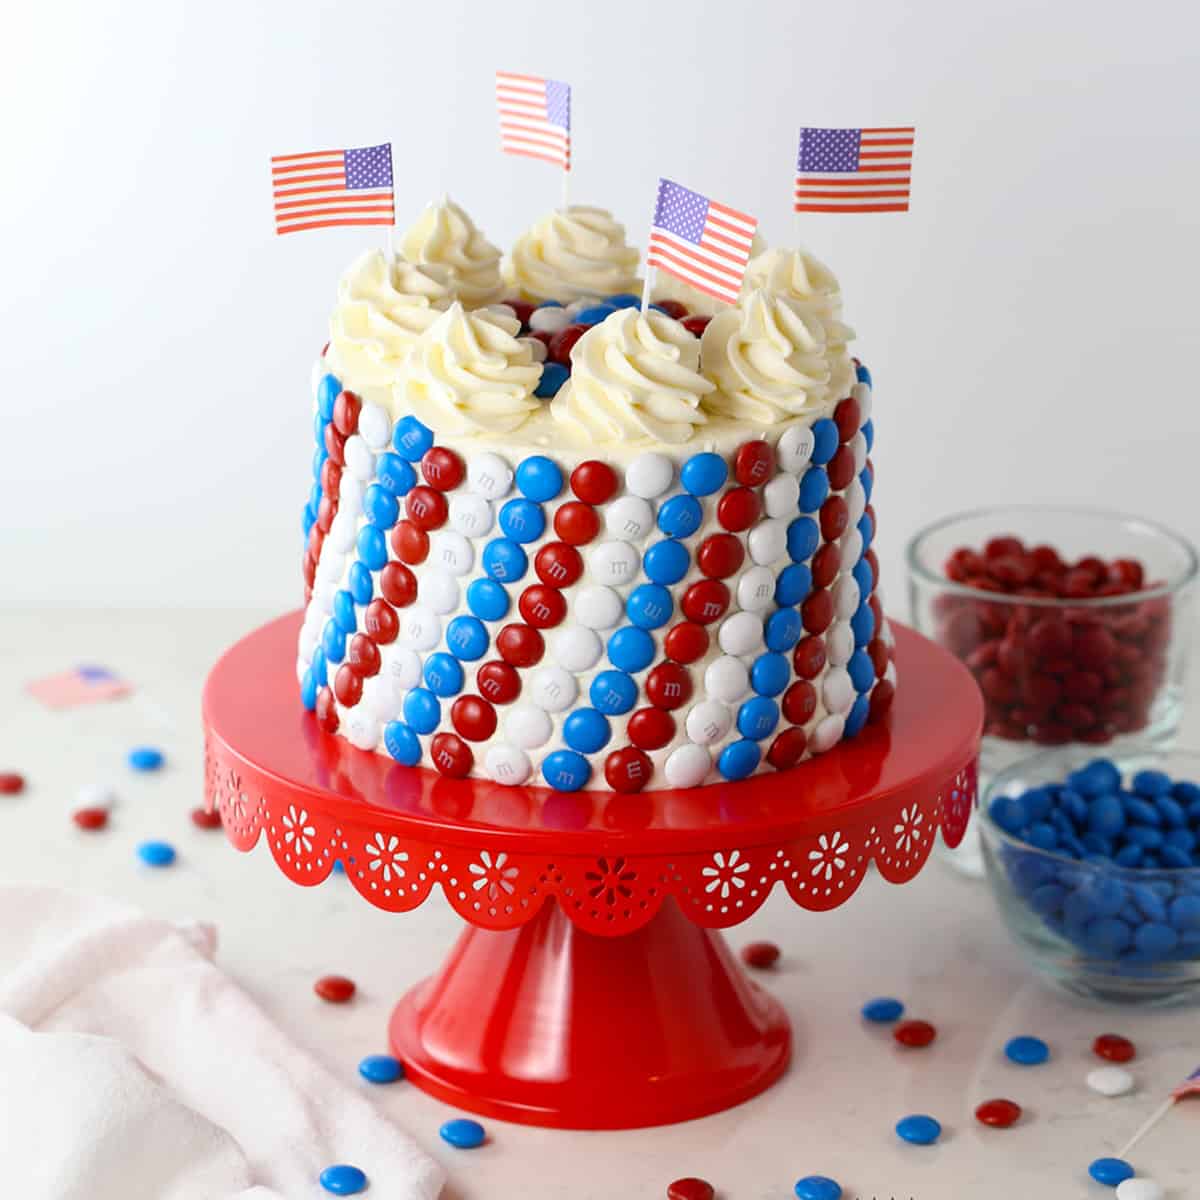 https://www.momlovesbaking.com/wp-content/uploads/2019/06/Red-White-Blue-M-and-M-Cake-SQ-3.jpg